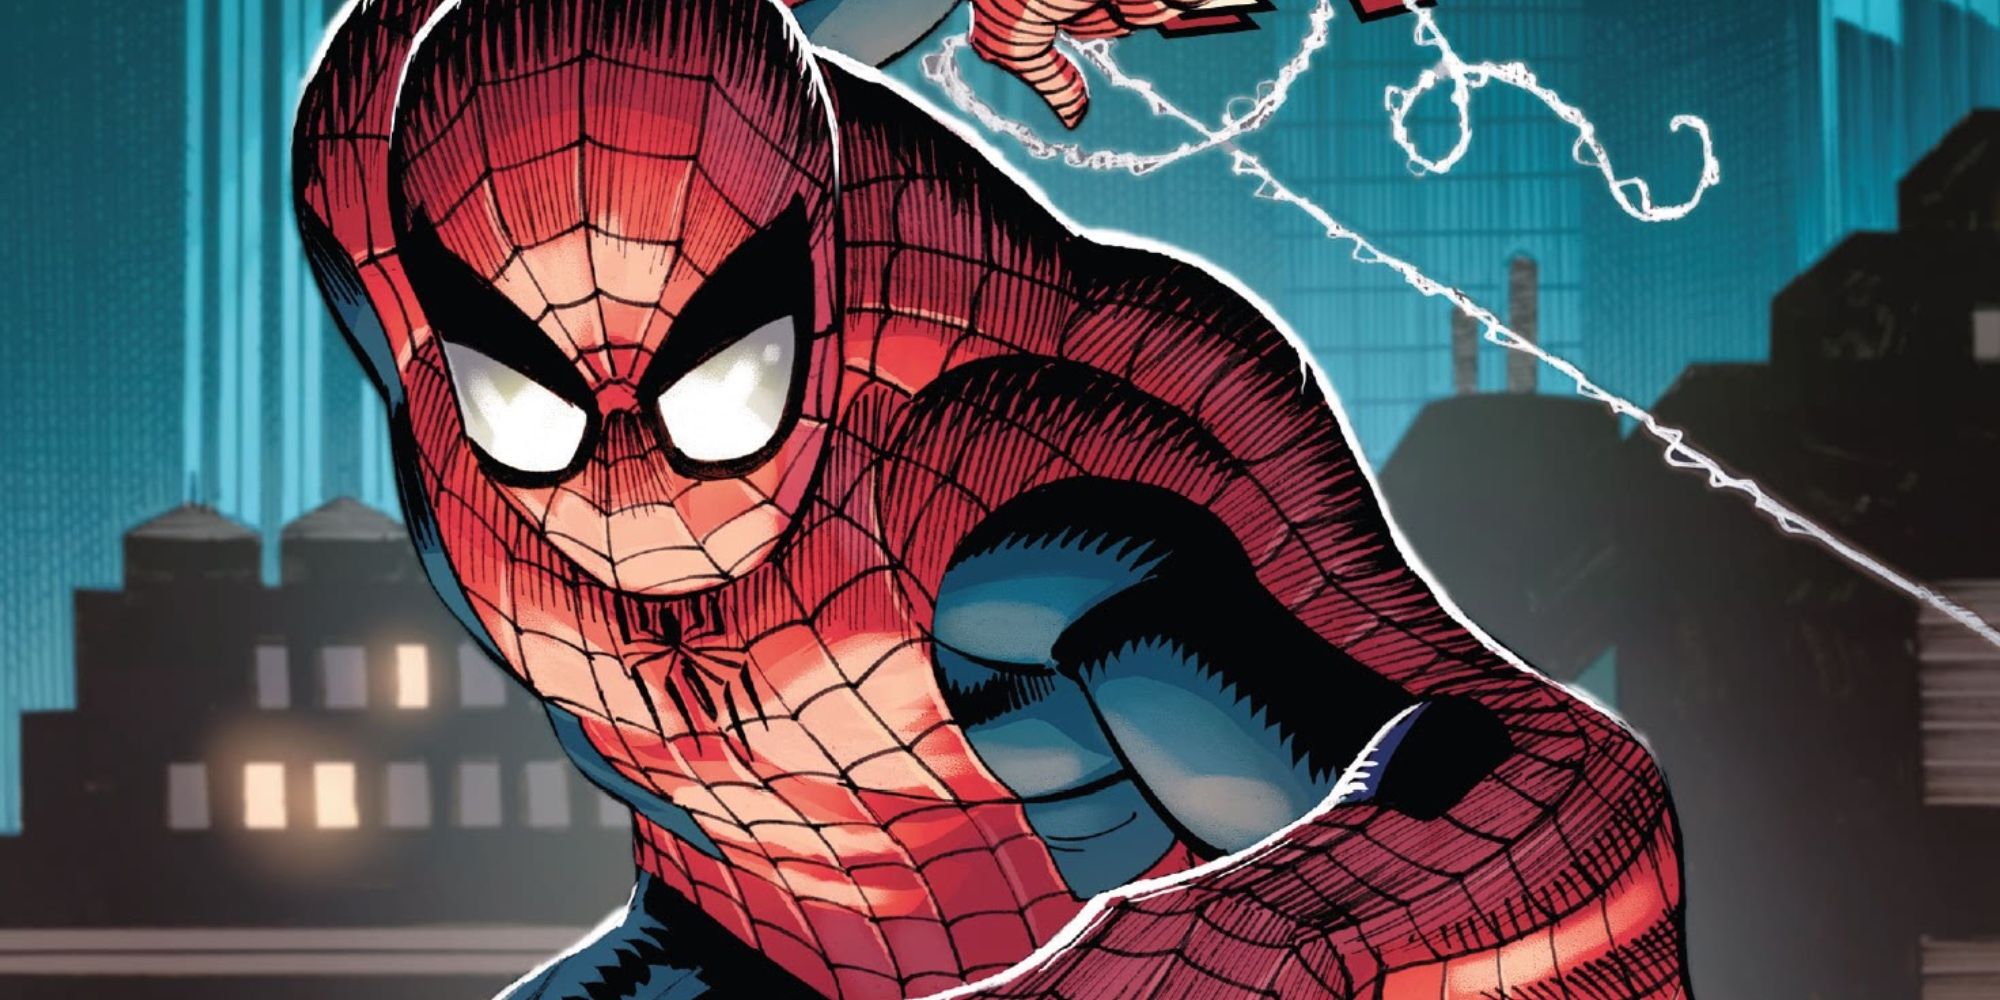 Marvel's Spider-Man Relaunch is a Surprise (But Not a Good One) Featured